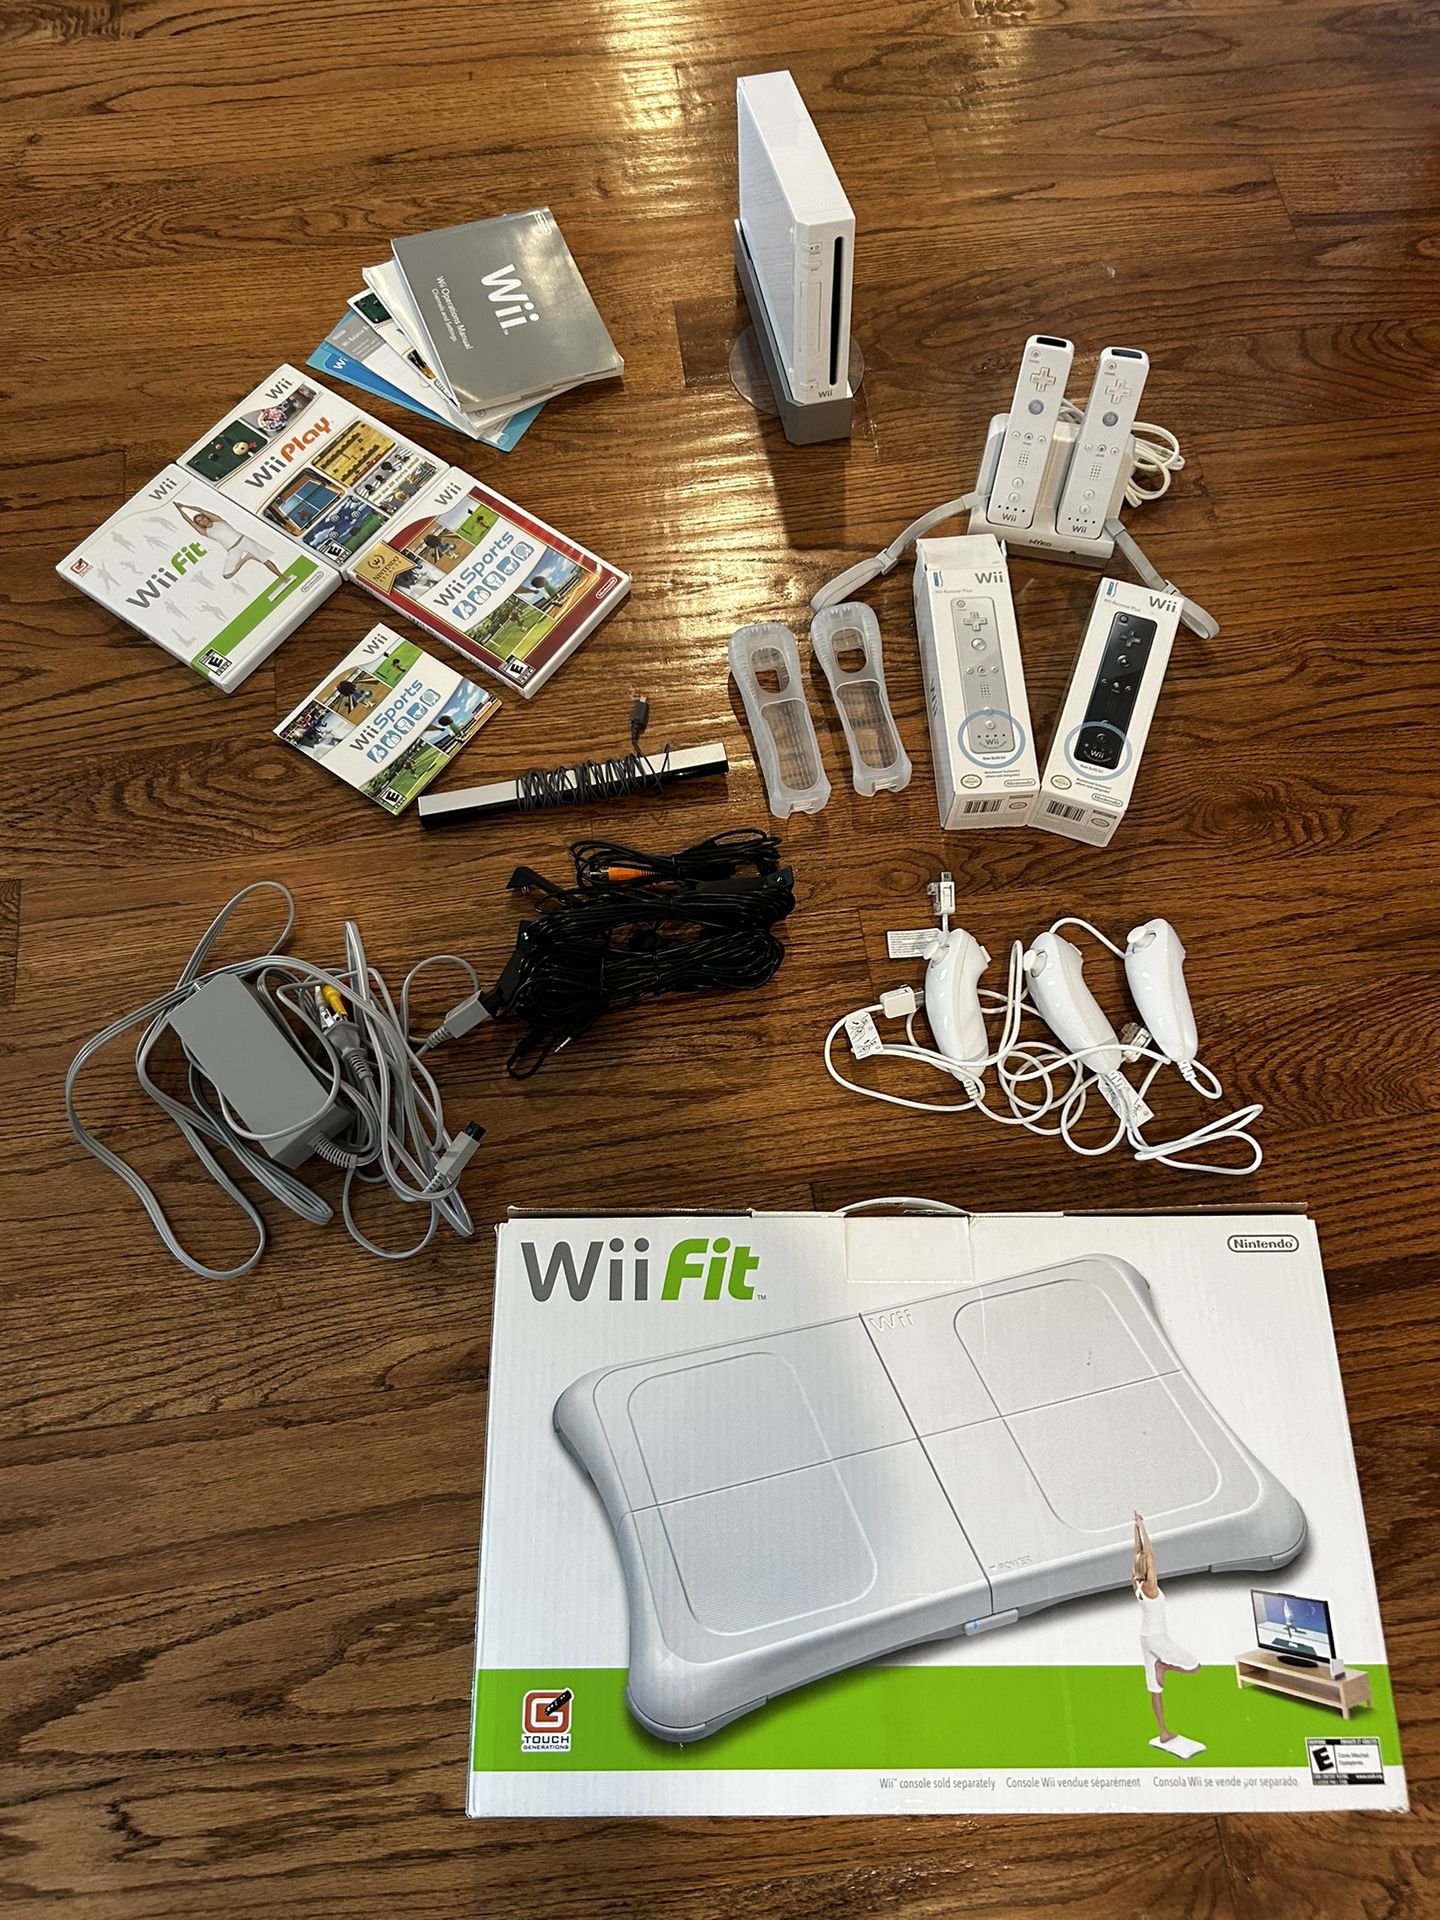 Wii Console + 4 Games + 4 Remotes + Fit Board